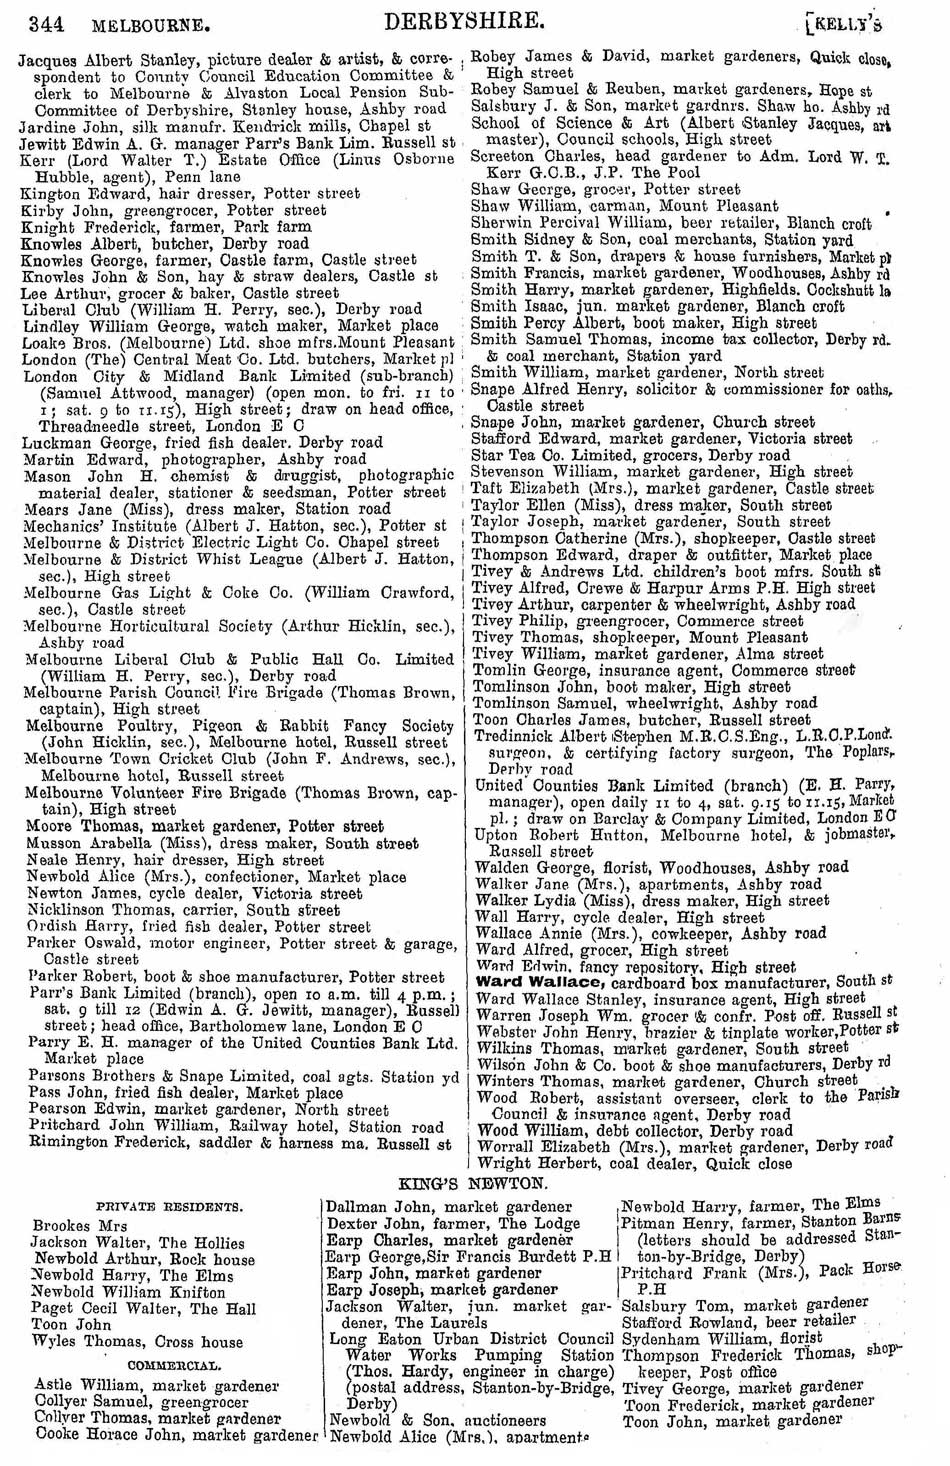 Kelly's-Directory-of-Melbourne-1912-Page-3